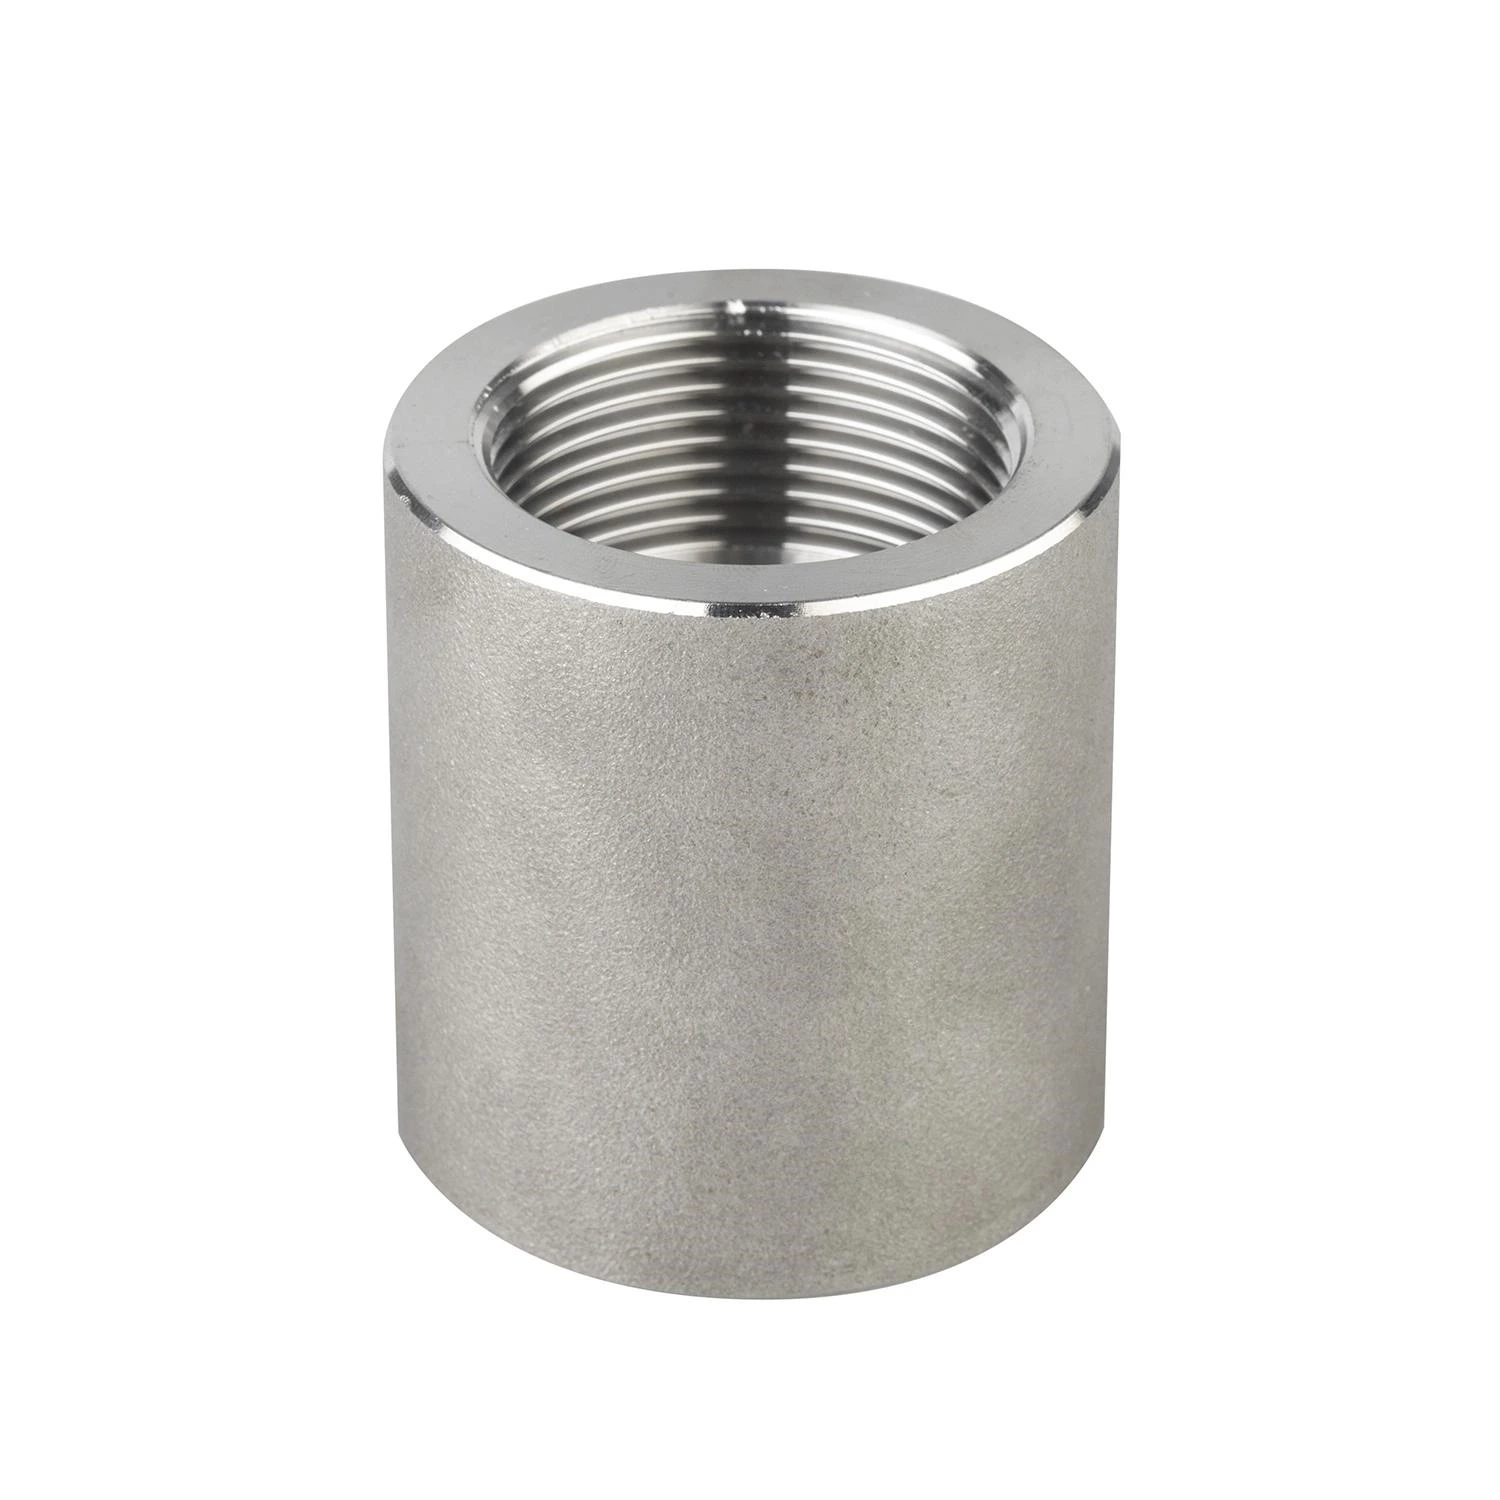 Stainless Steel Pipe Fittings 304 1/4"-4" NPT/BSPT Female Thread Coupling